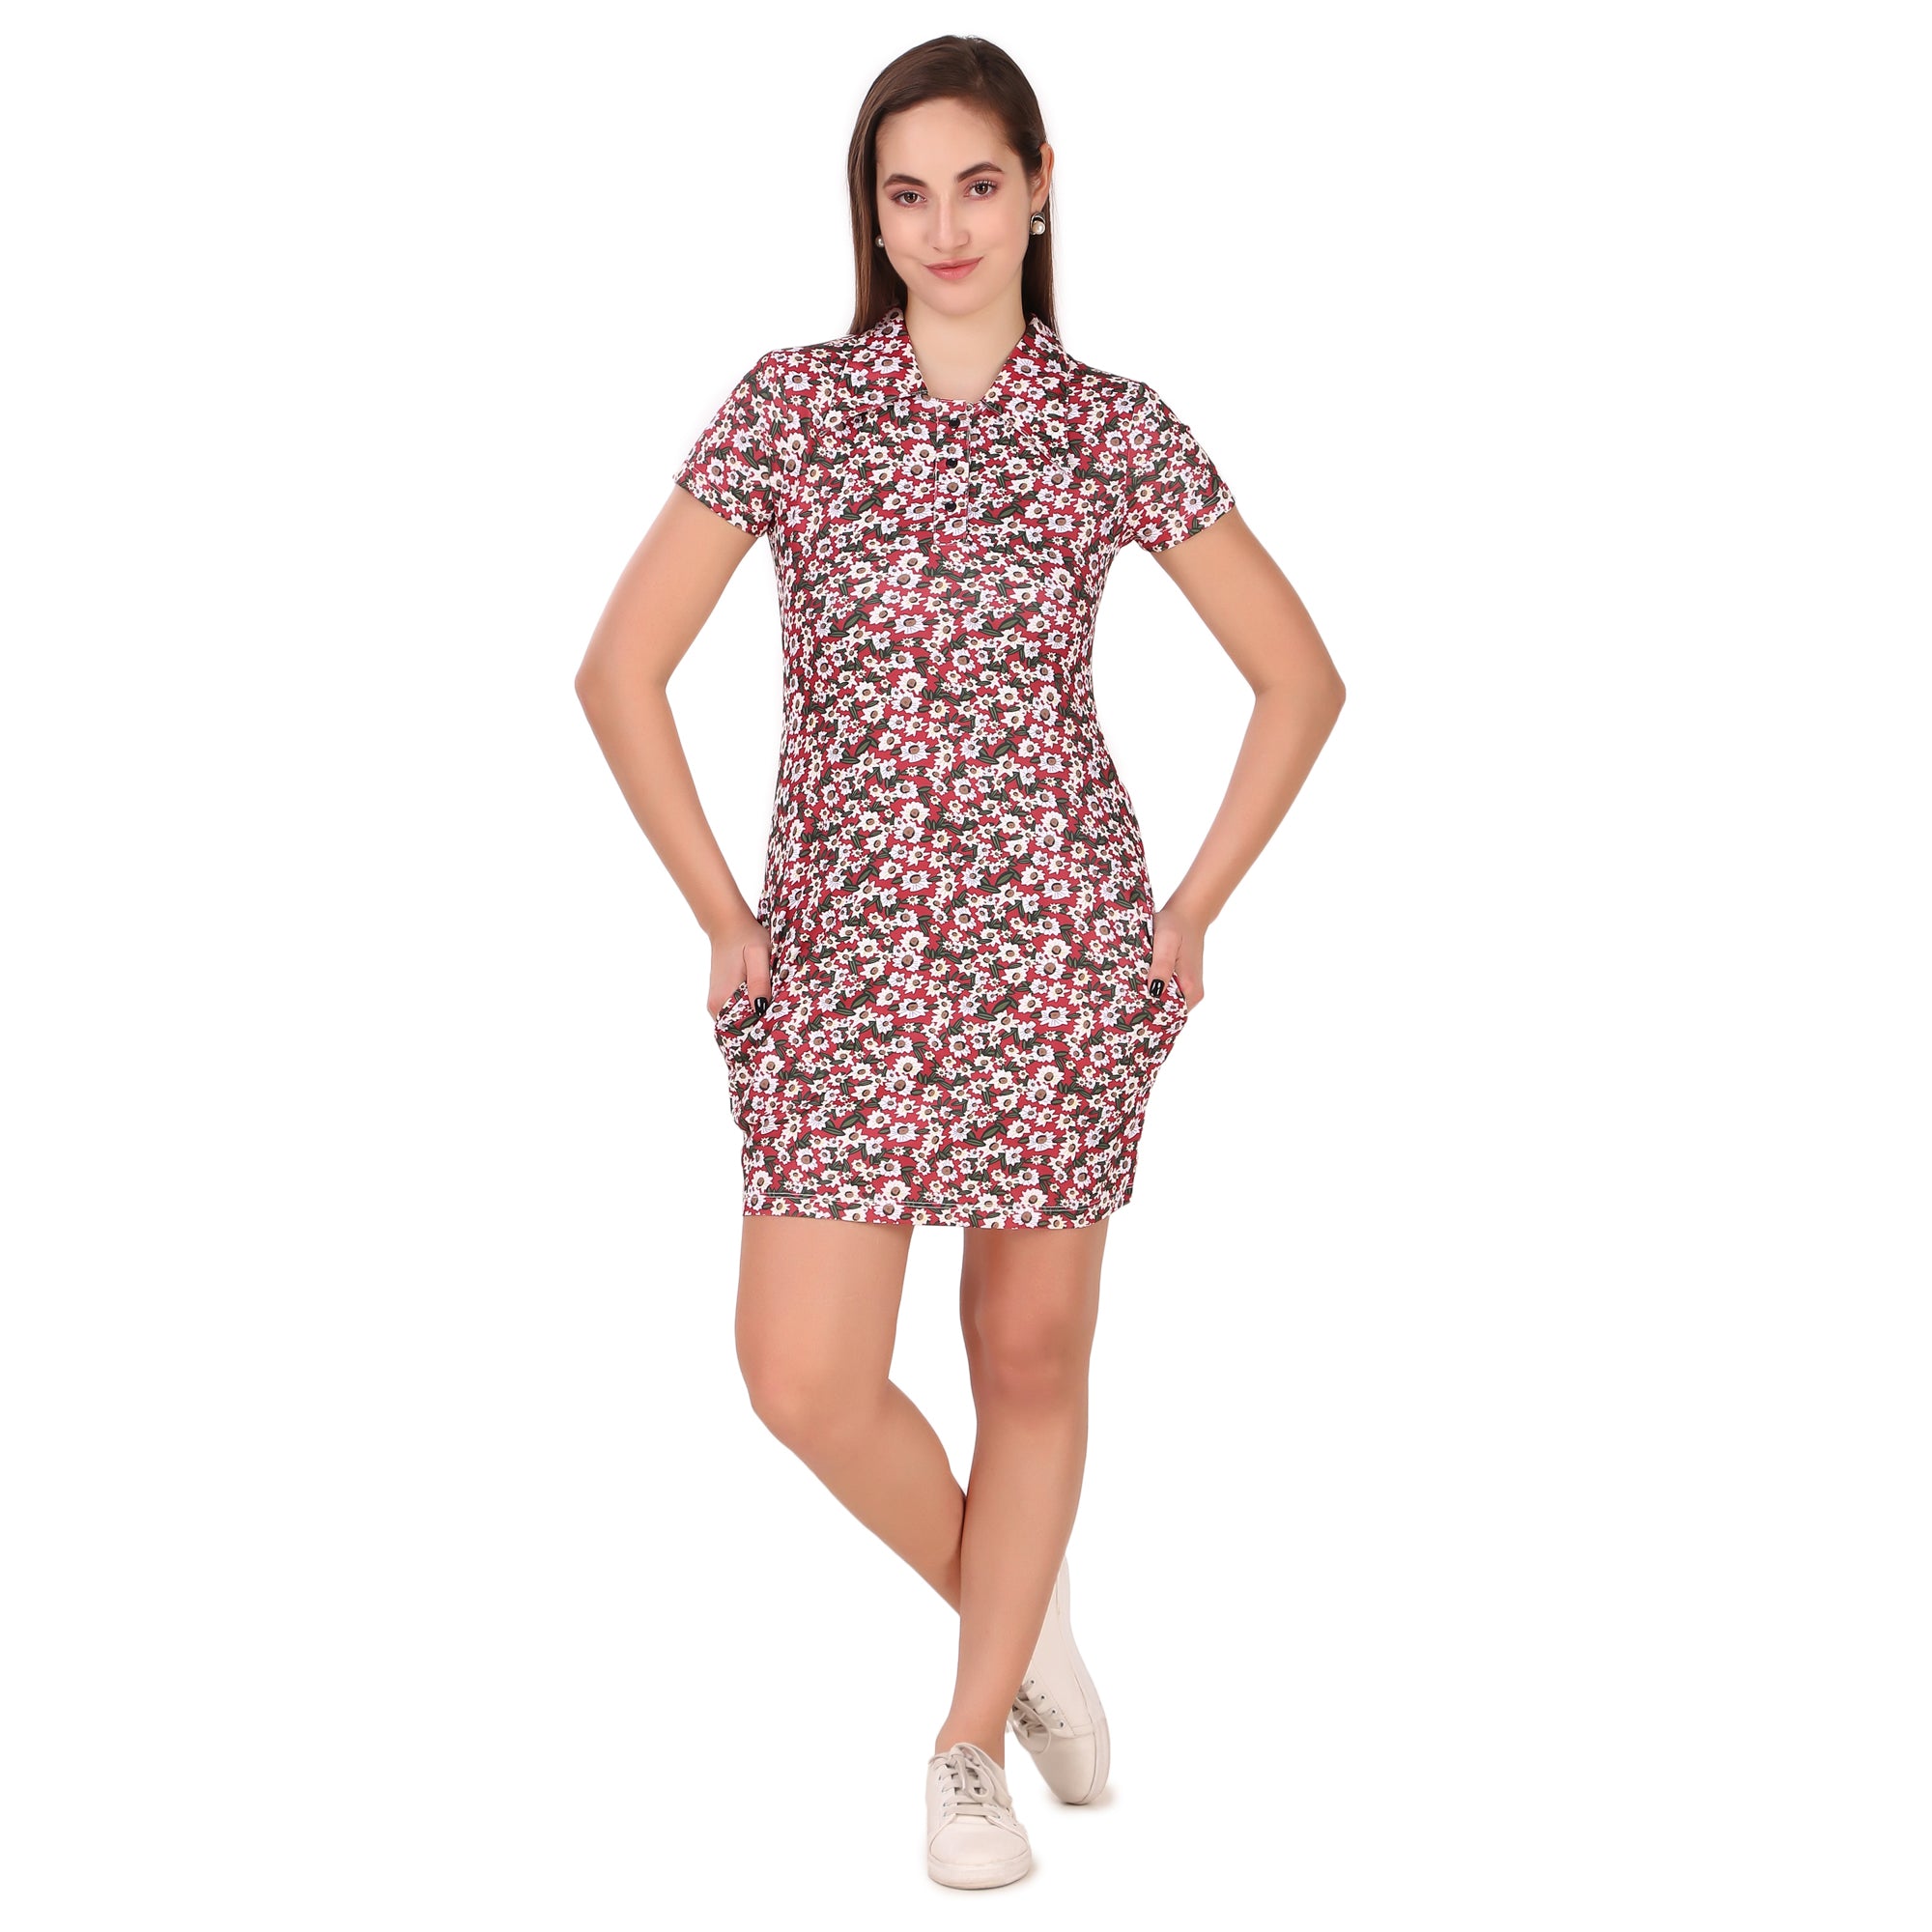 Activewear Collar Neck Dress For Women (Red Floral)